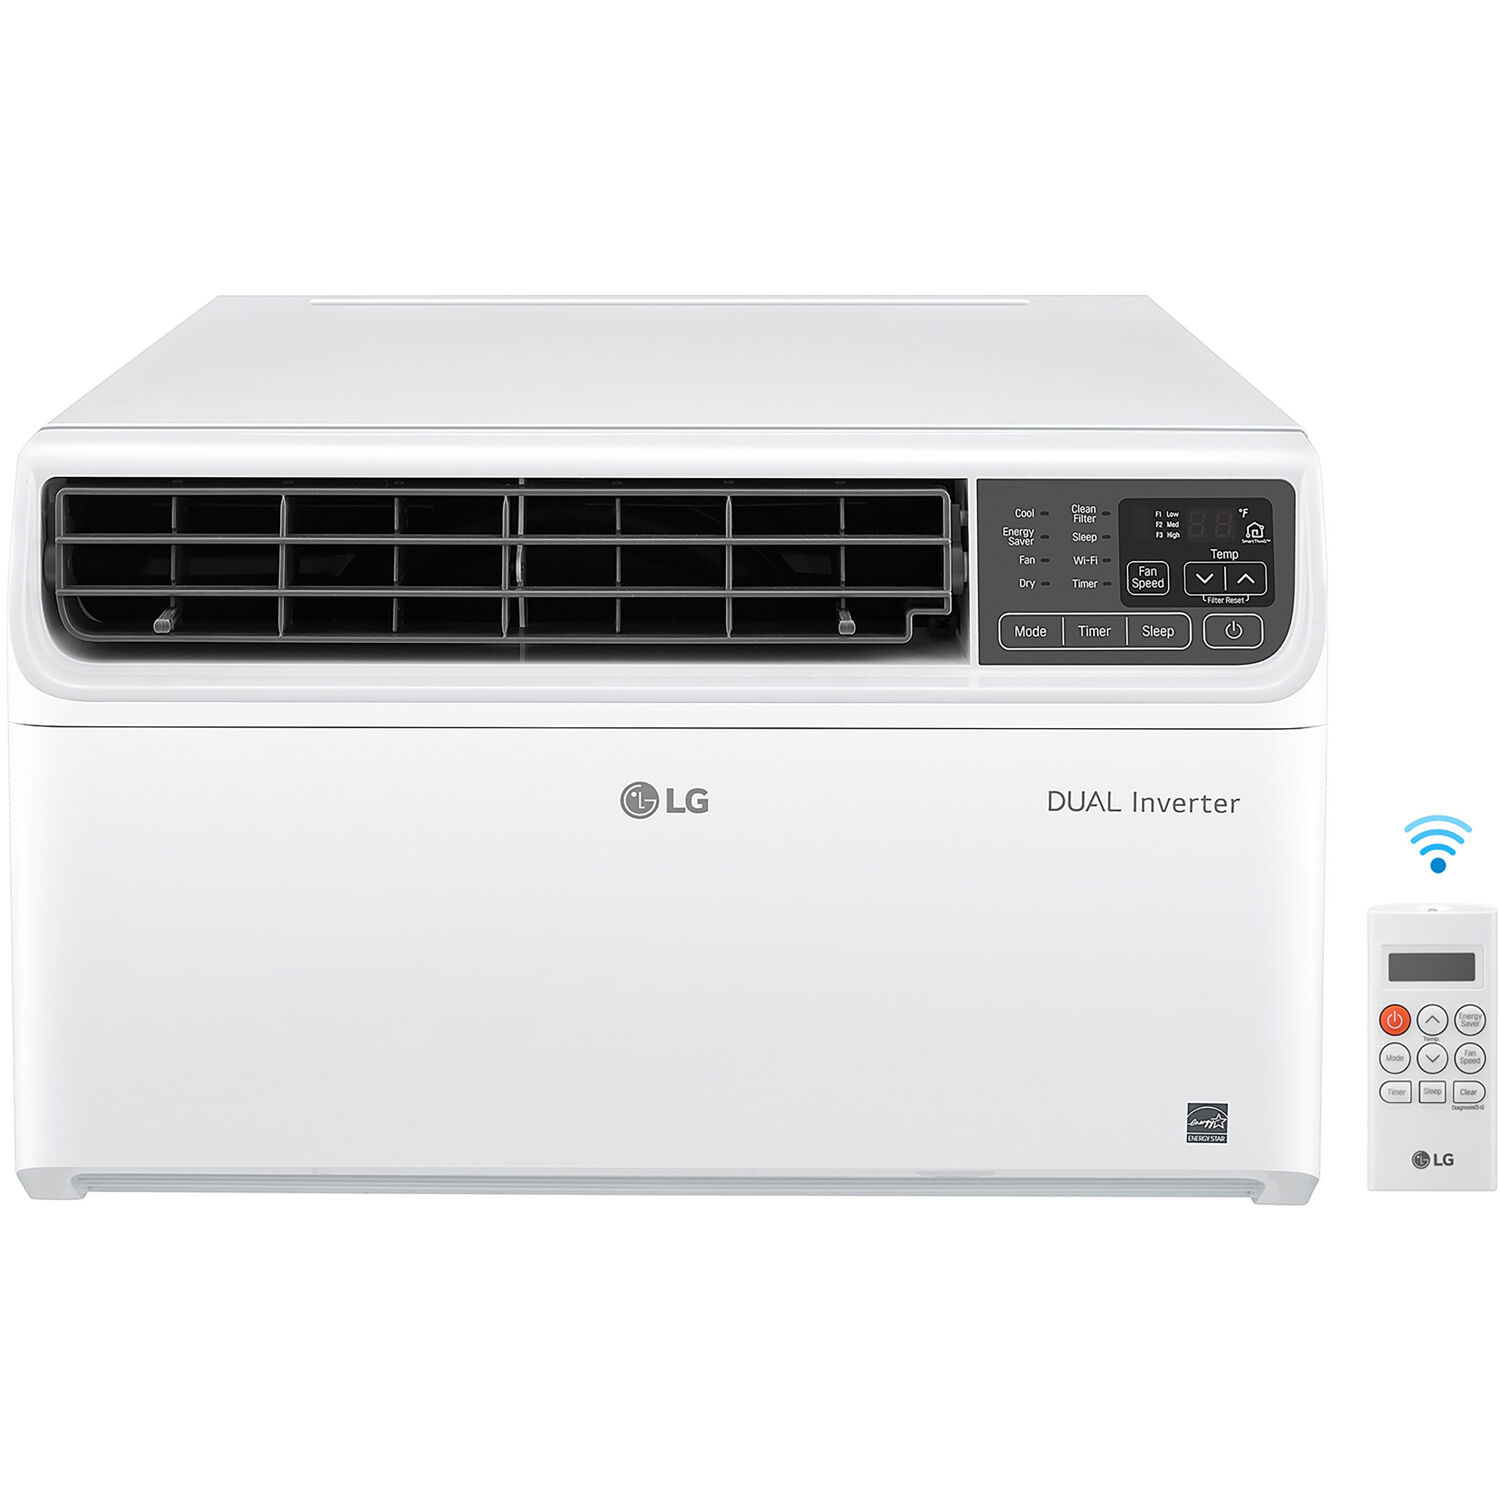 LG 8,000 BTU DUAL Inverter Smart Window Air Conditioner, Cools 340 sq ft, Works with Amazon Alexa - image 1 of 9